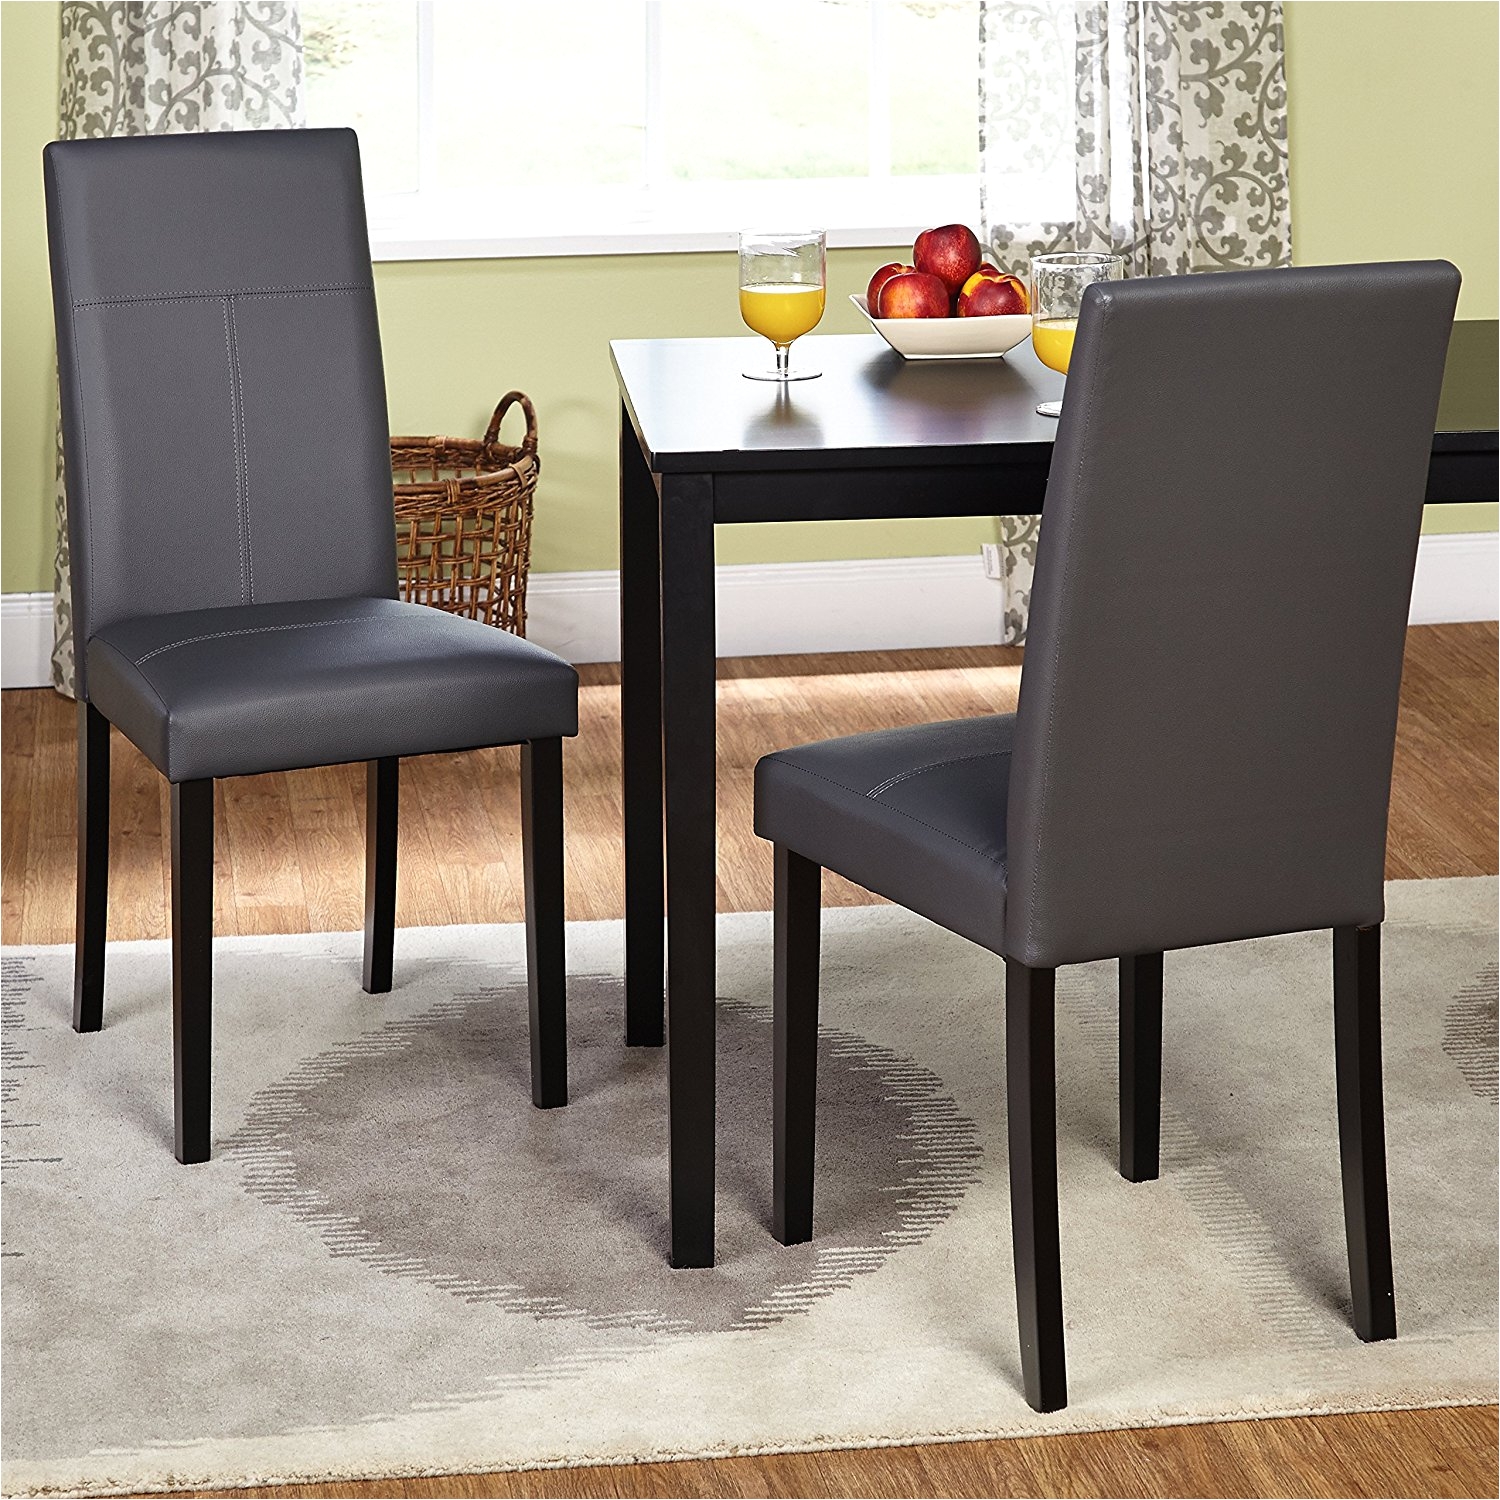 Navy Blue Parsons Dining Chairs Chair Navy Blue Dining Chairs New Discount Room Sale Of Leather